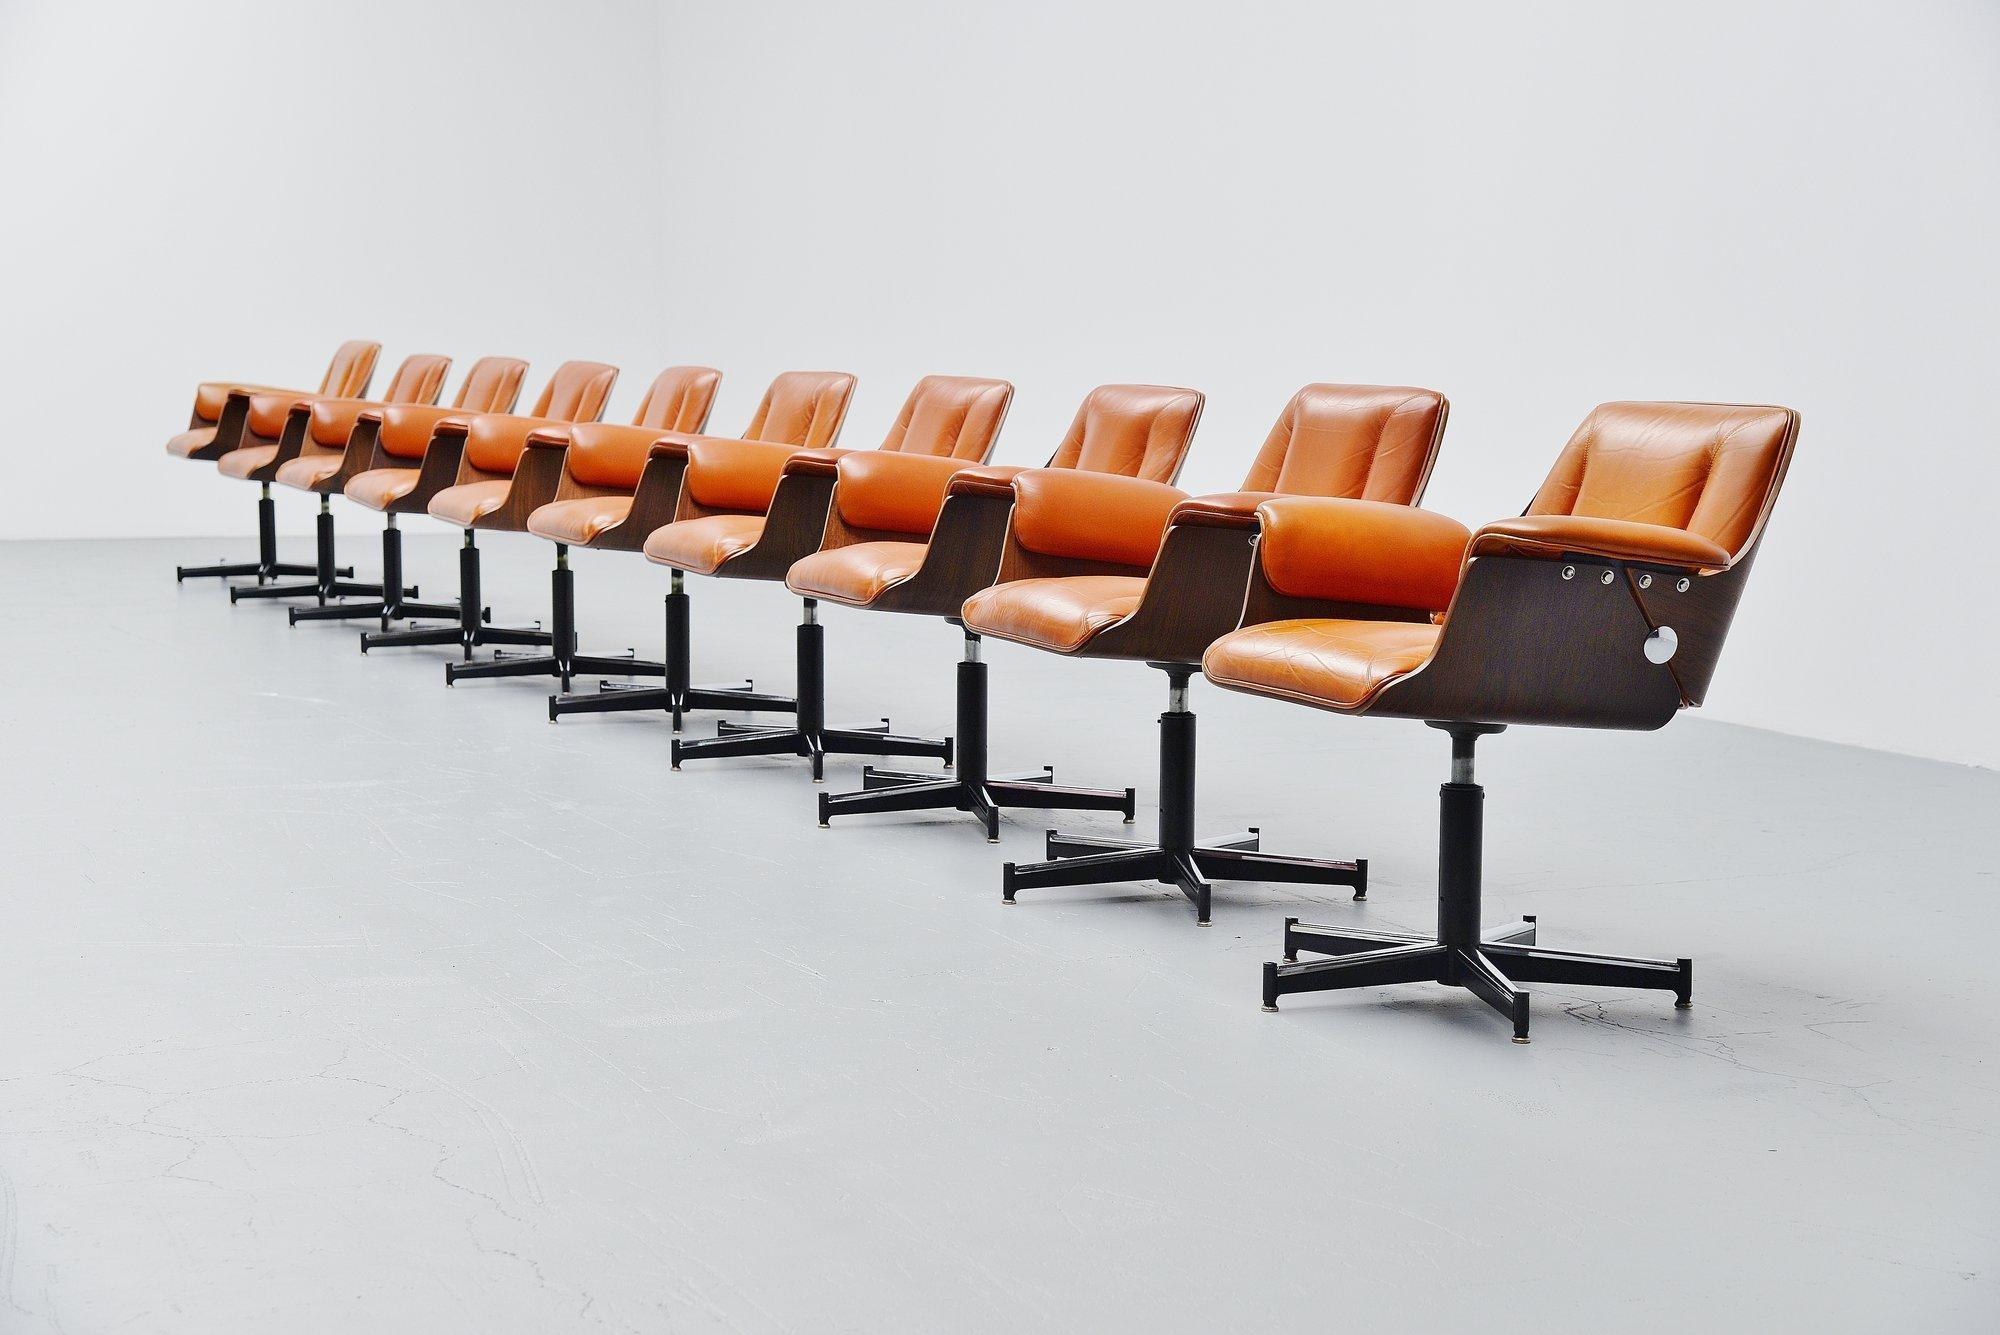 Fantastic set of ten Probjeto office chairs designed by Carlo B. Fongaro and manufactured by Dinamarquesa, Brazil, 1975. These chairs have splendid Brazilian rosewood shell seats with cognac colored leather upholstery. The chairs have black painted